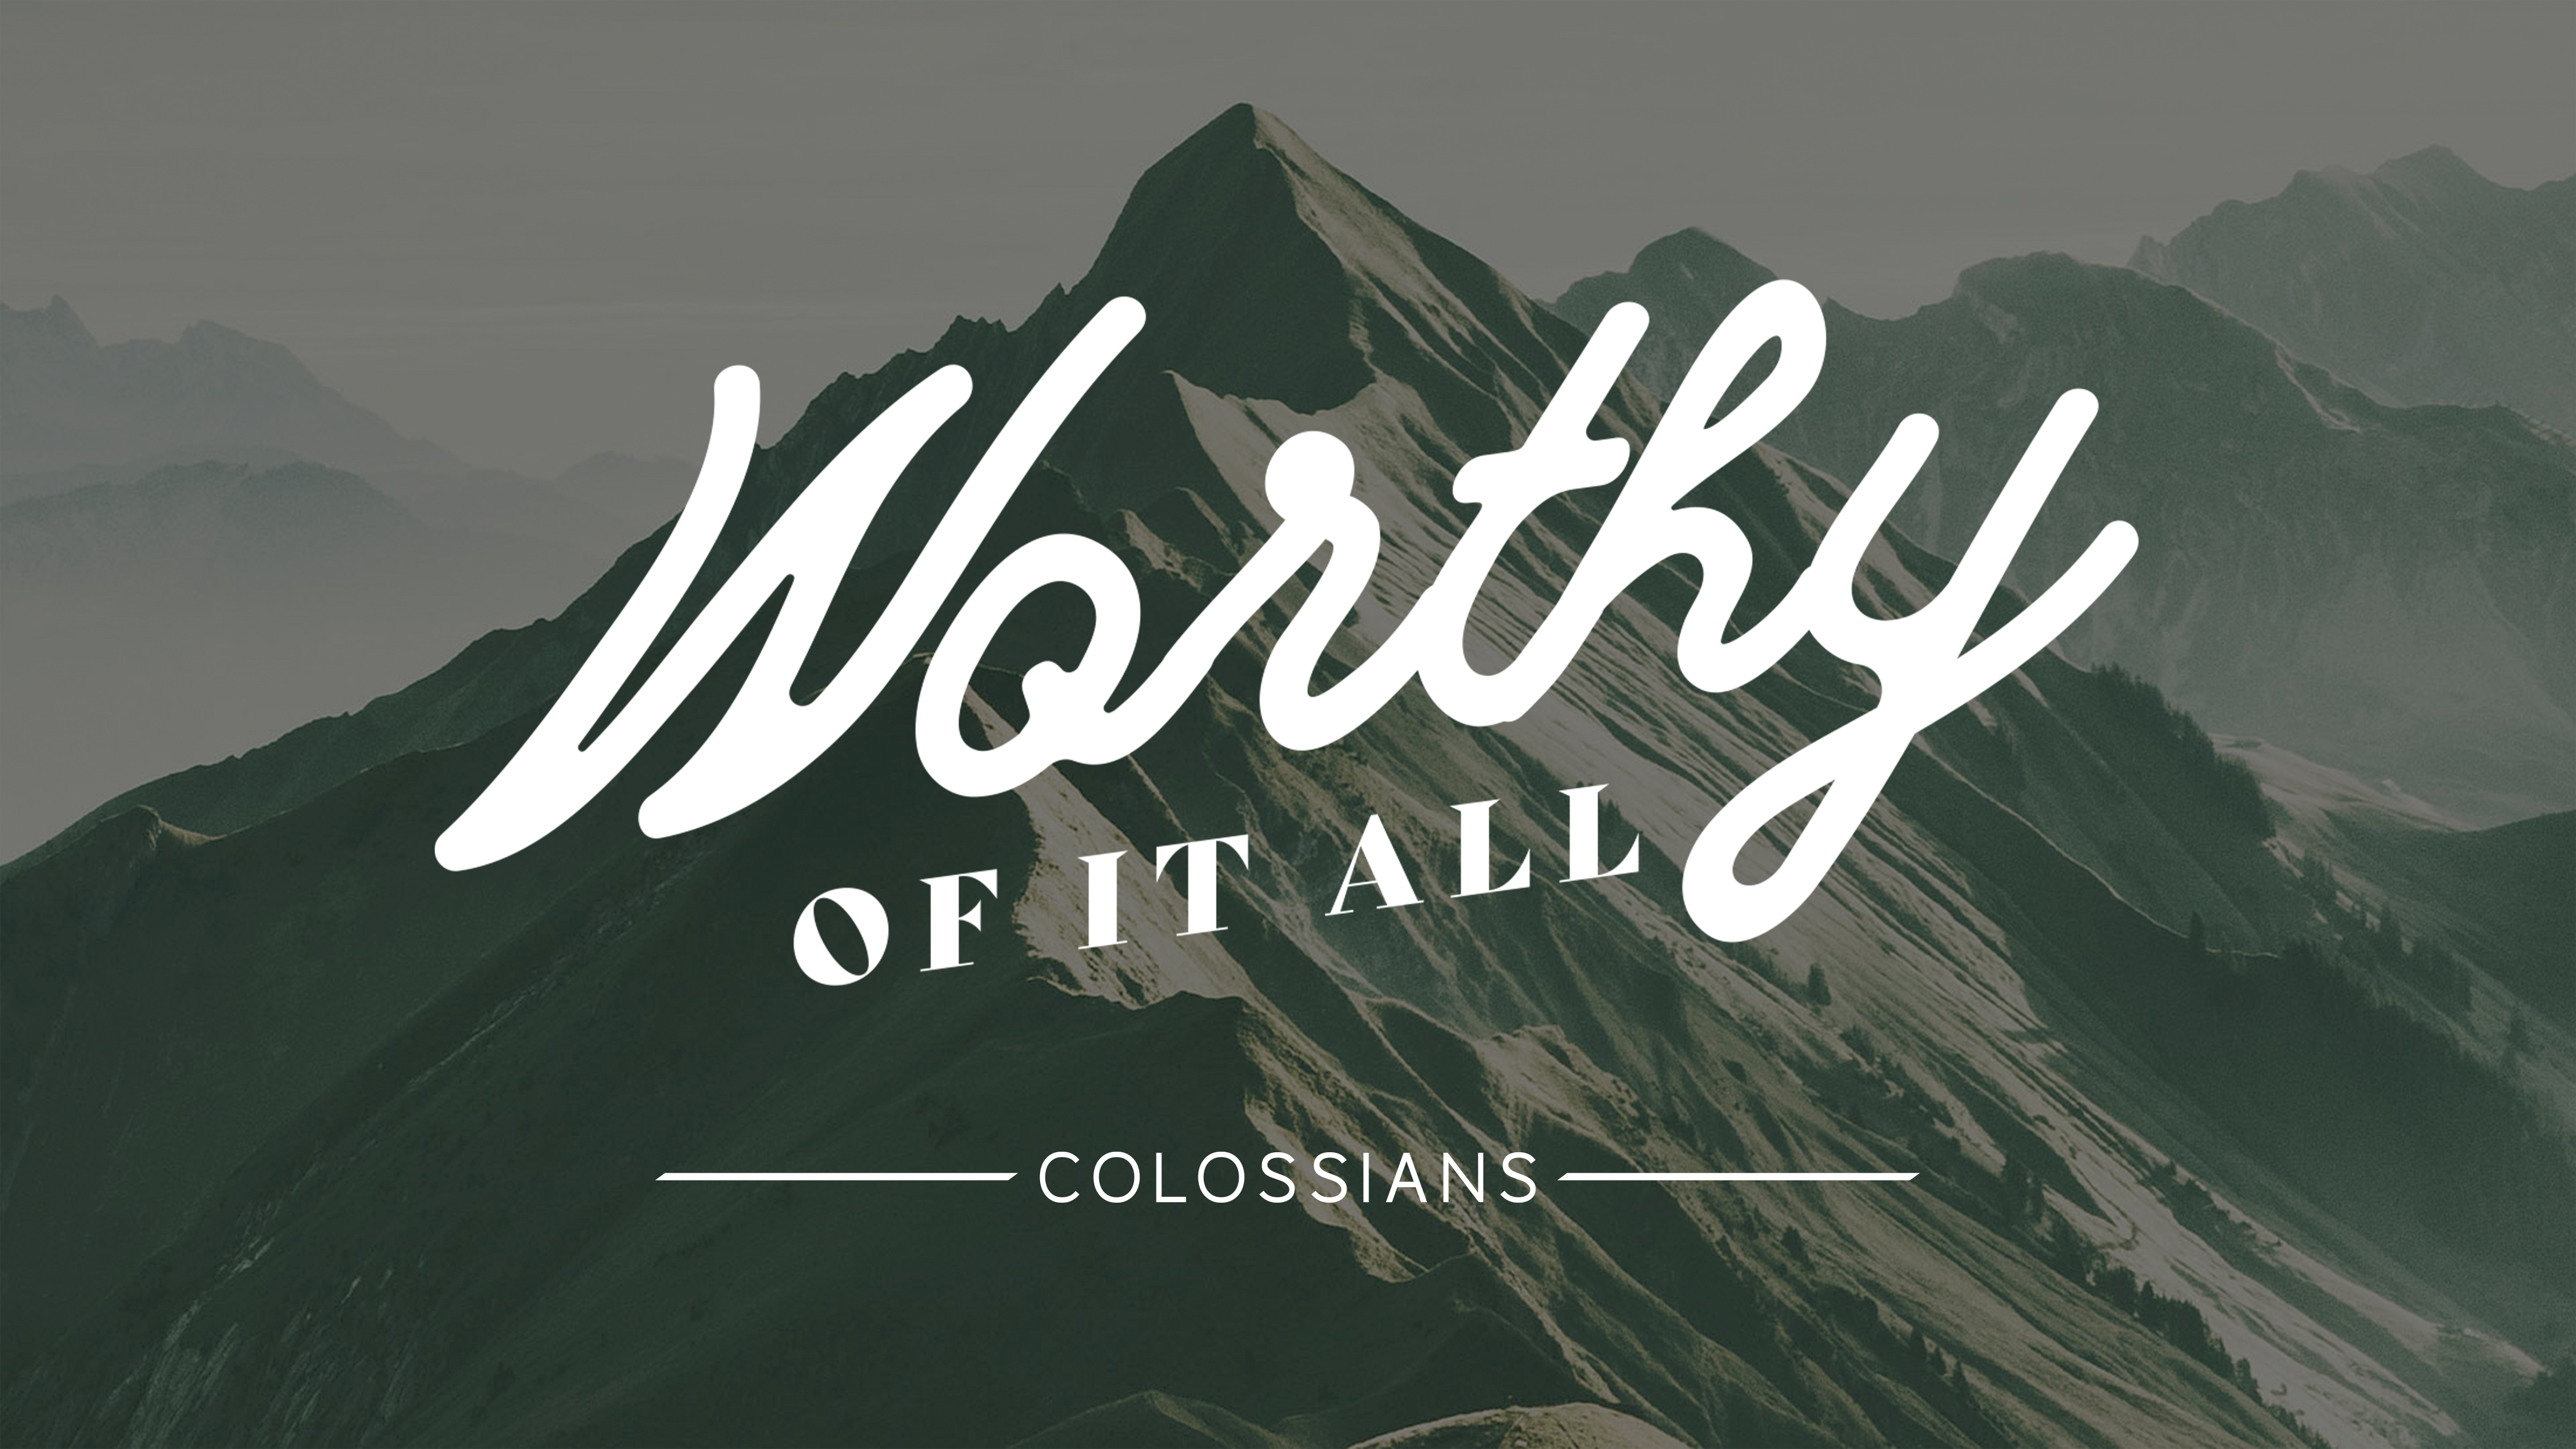 Worthy of it All (Colossians 3:12-14)